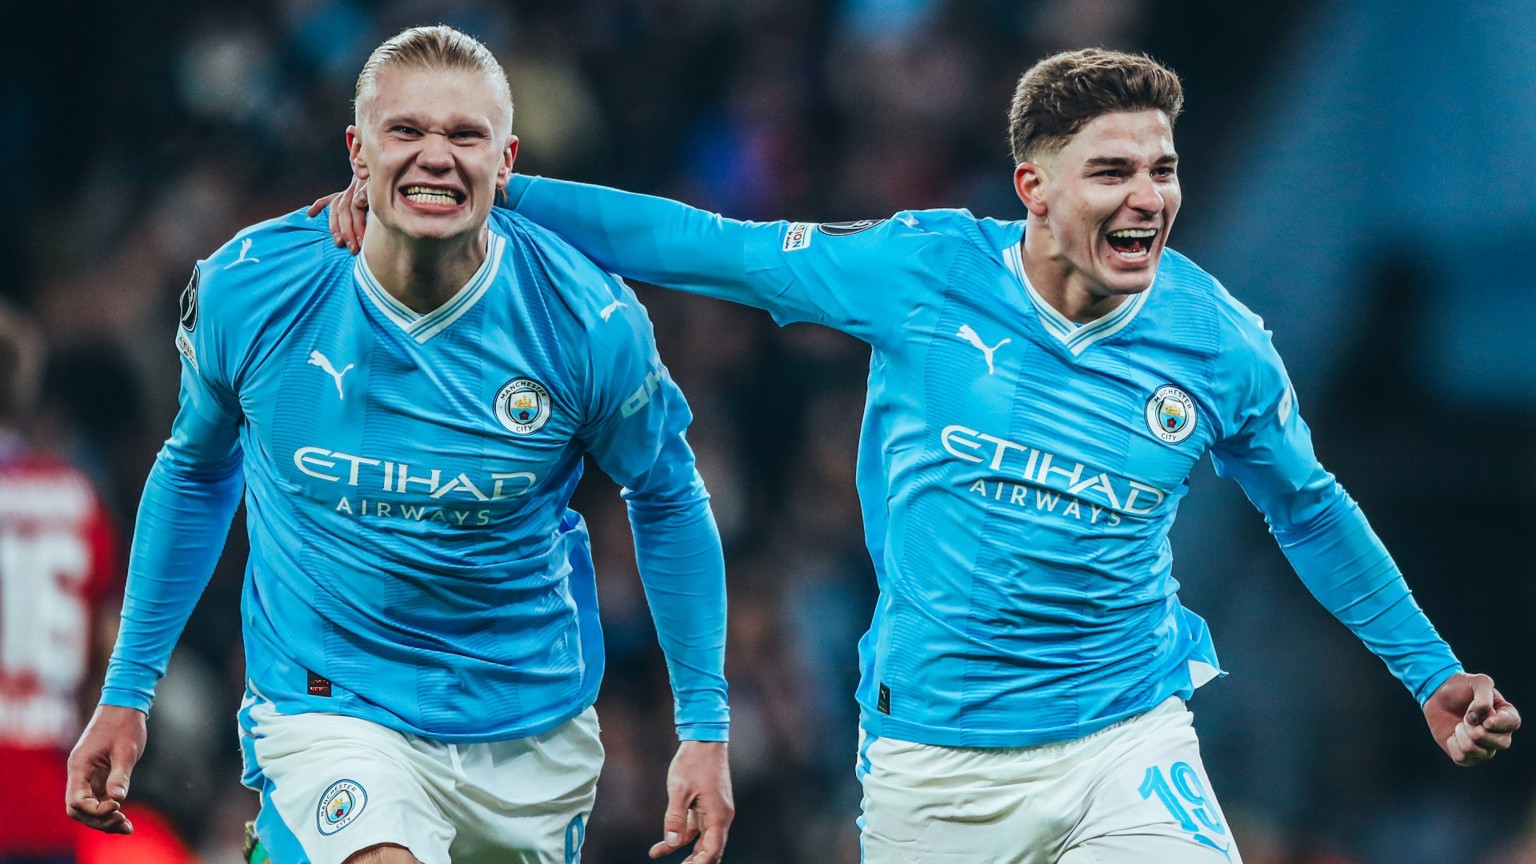 City’s fantastic fightback secures Champions League group top spot